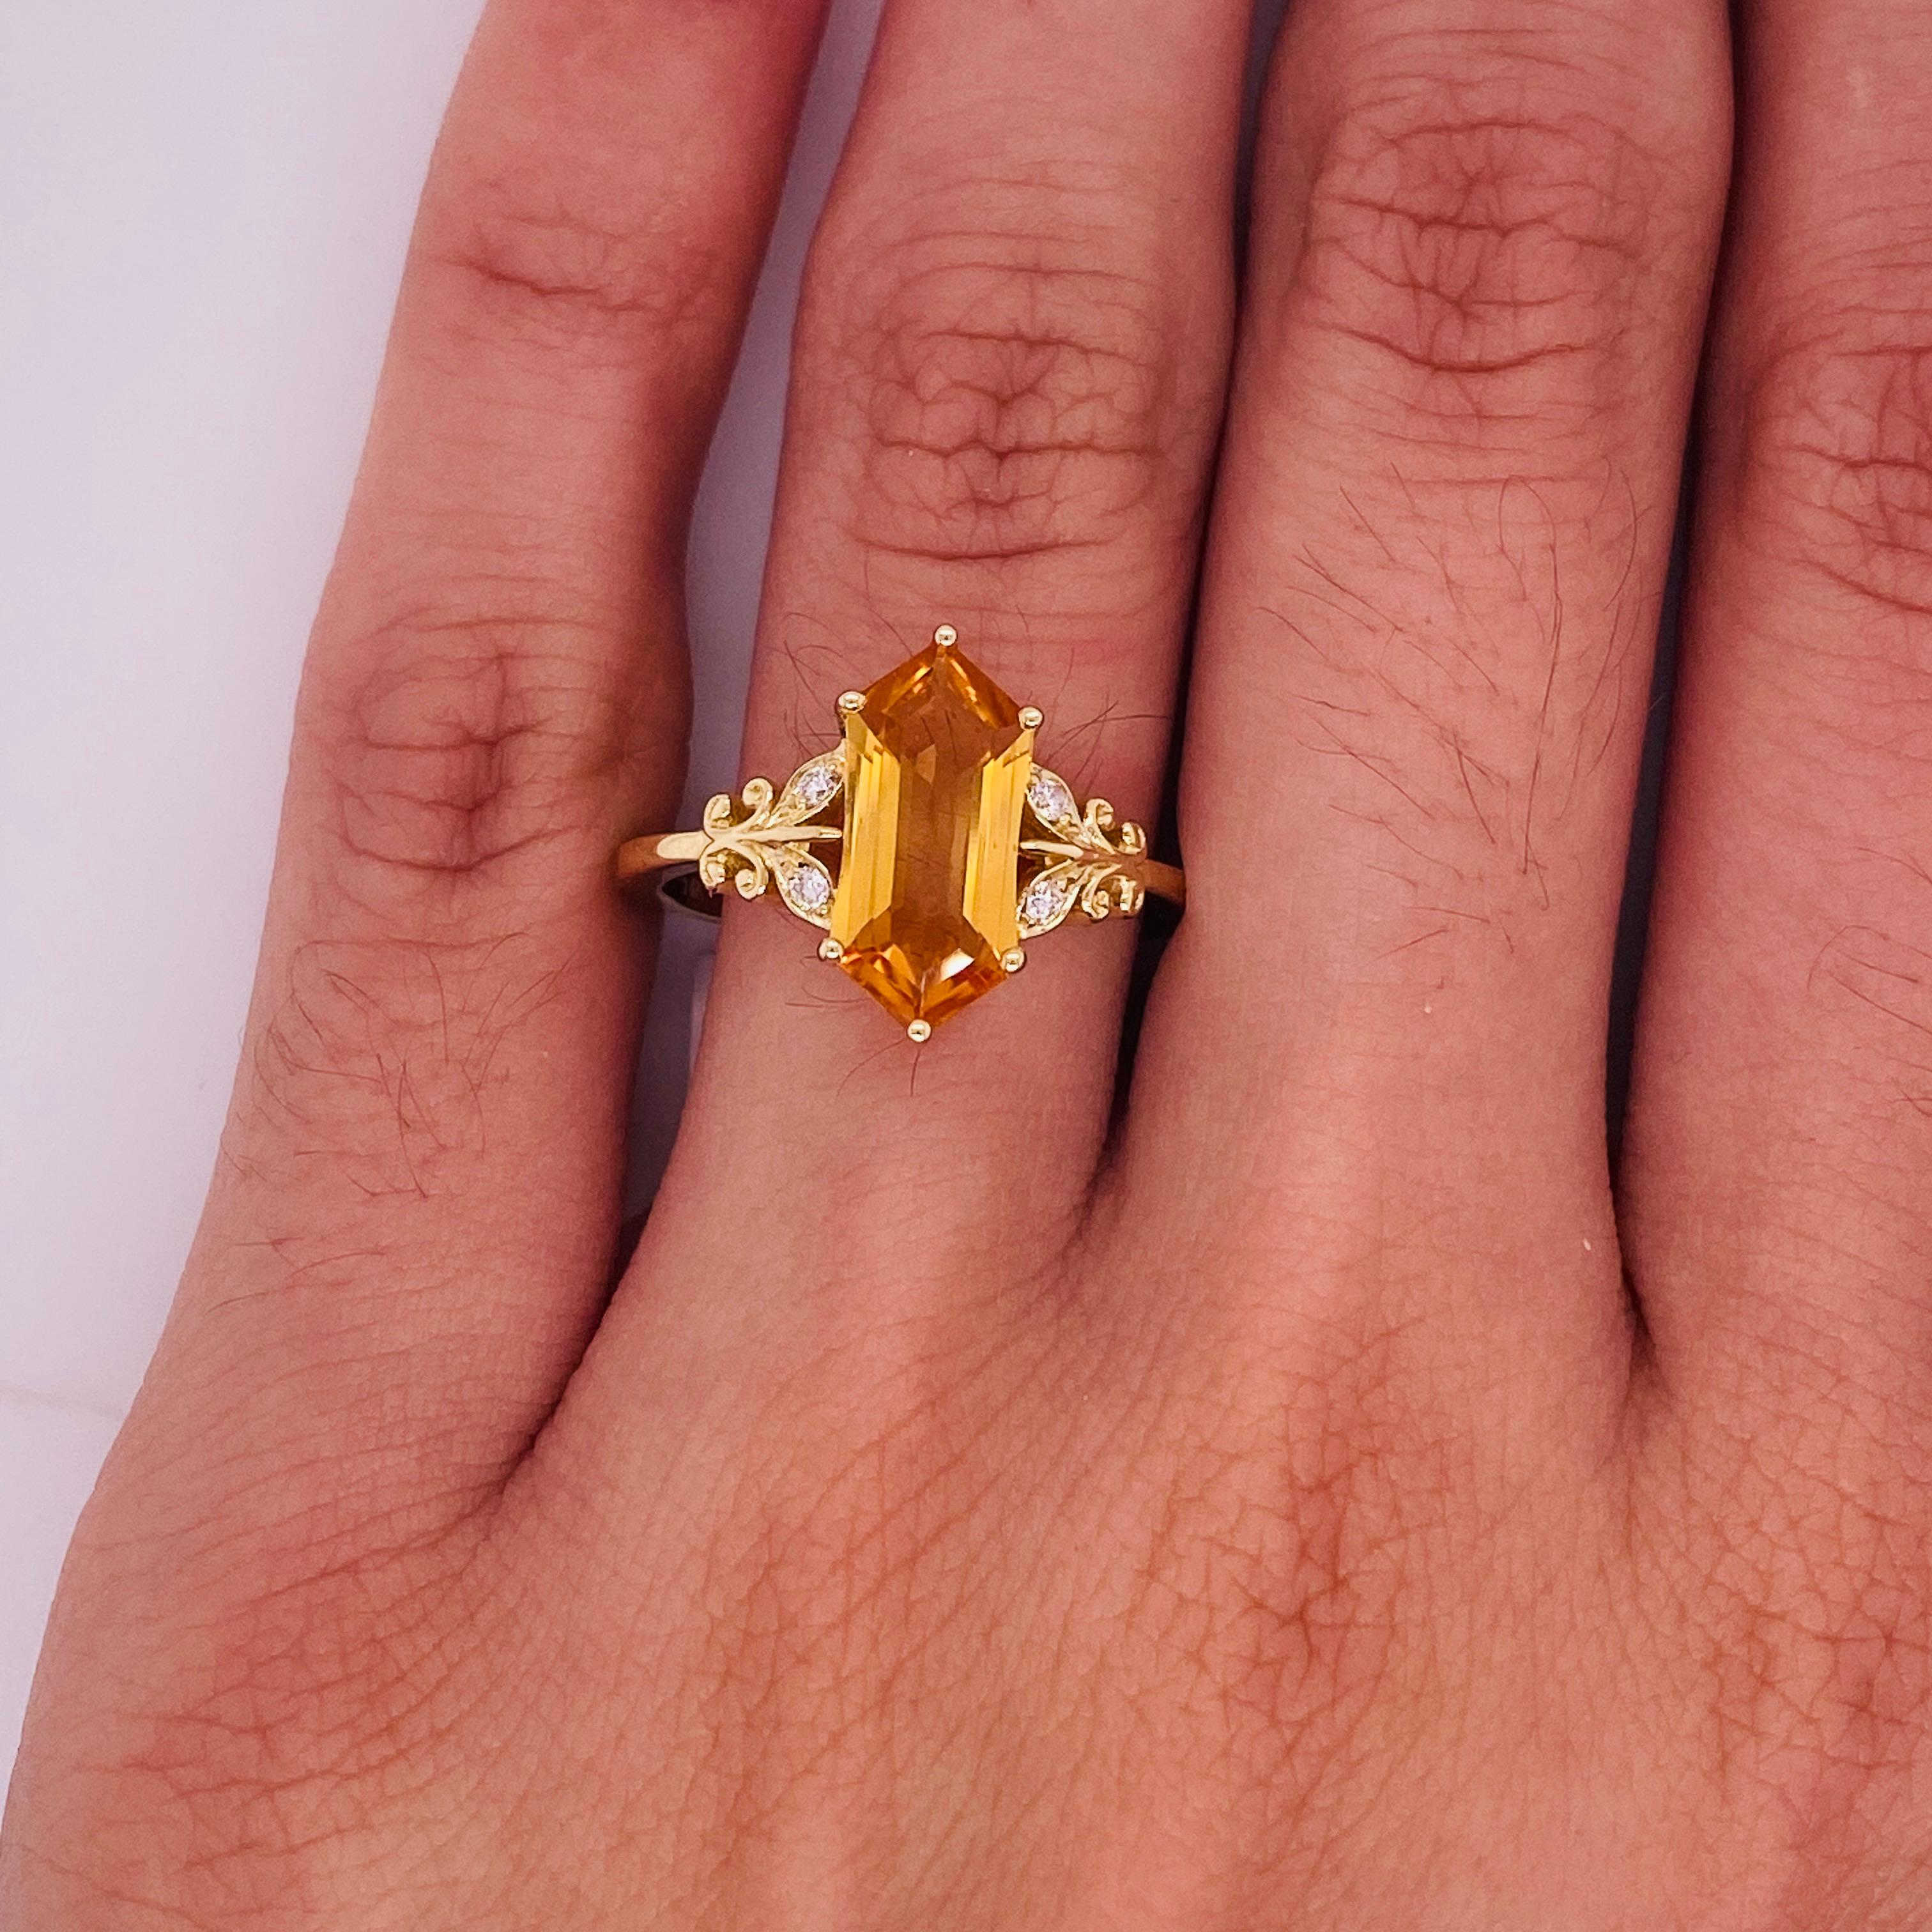 For Sale:  Hexagonal Citrine Ring with Diamonds and 6 Sides 2.15 Carat Total Weight 4